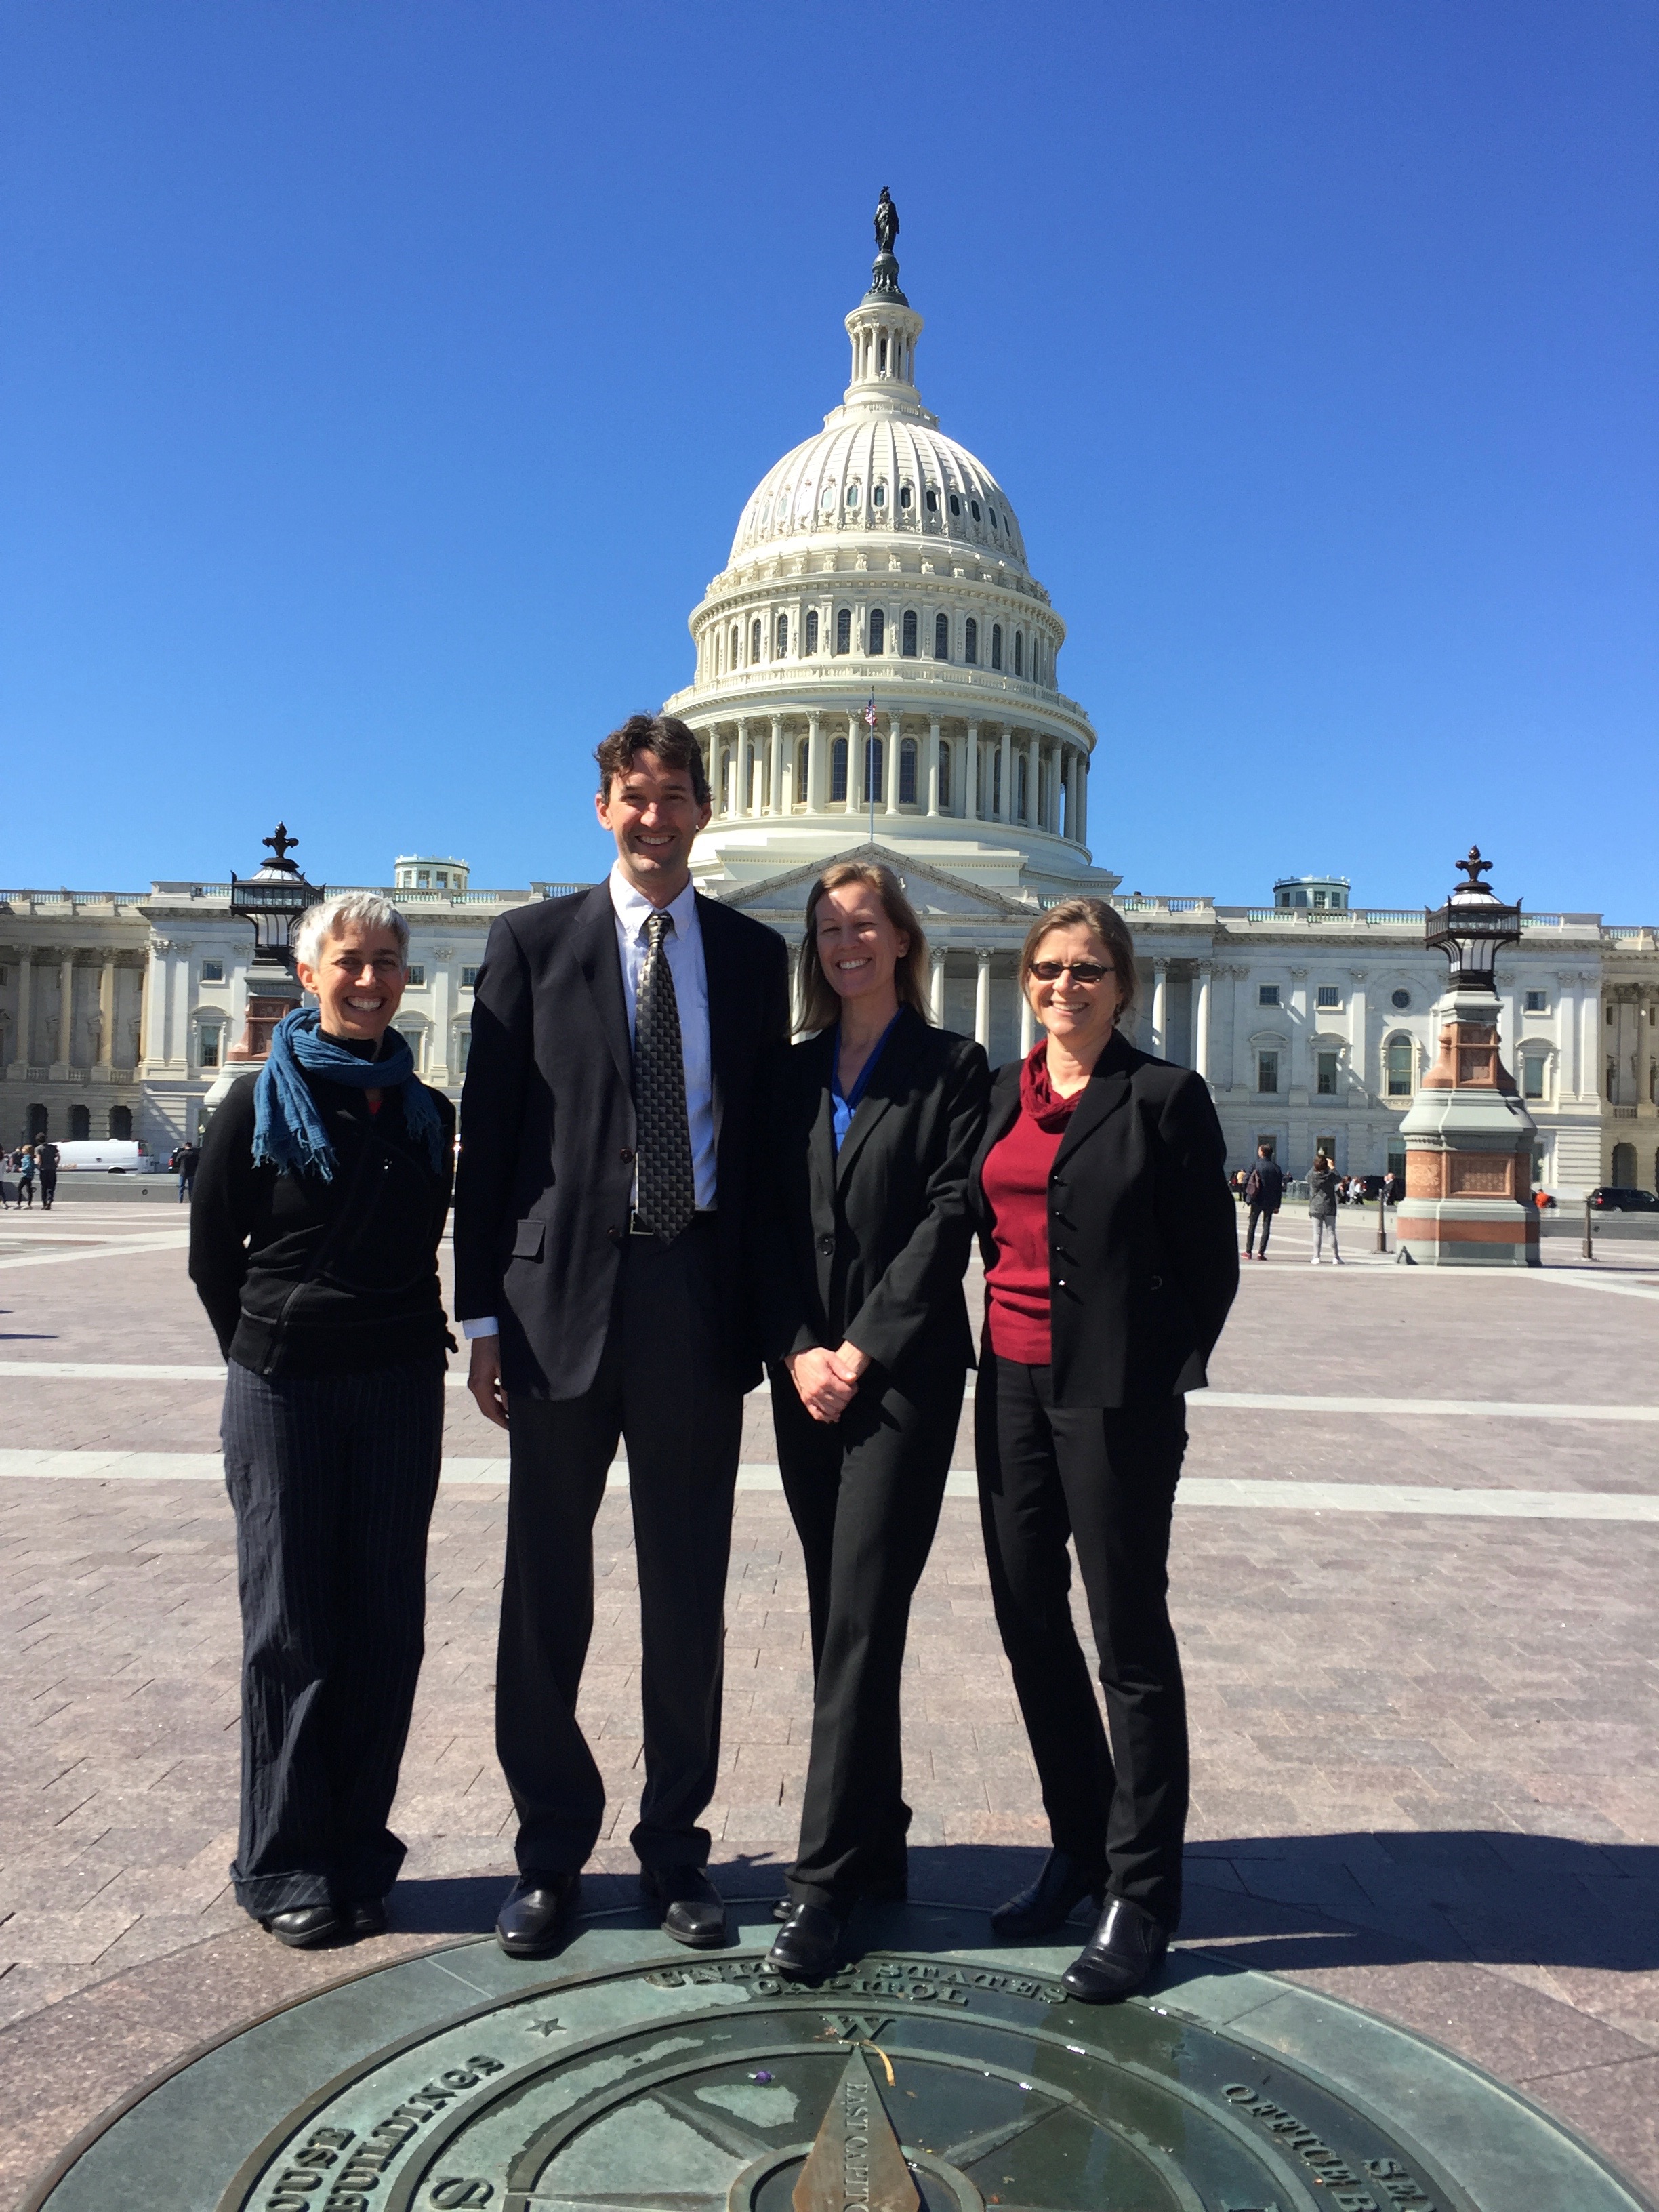 Our advocacy group included, pictured from left to right, Amy Zanne (George Washington University), Steve Allison (UC Irvine), Jennifer Funk (Chapman University), and Jutta Burger (Irvine Ranch Conservancy).